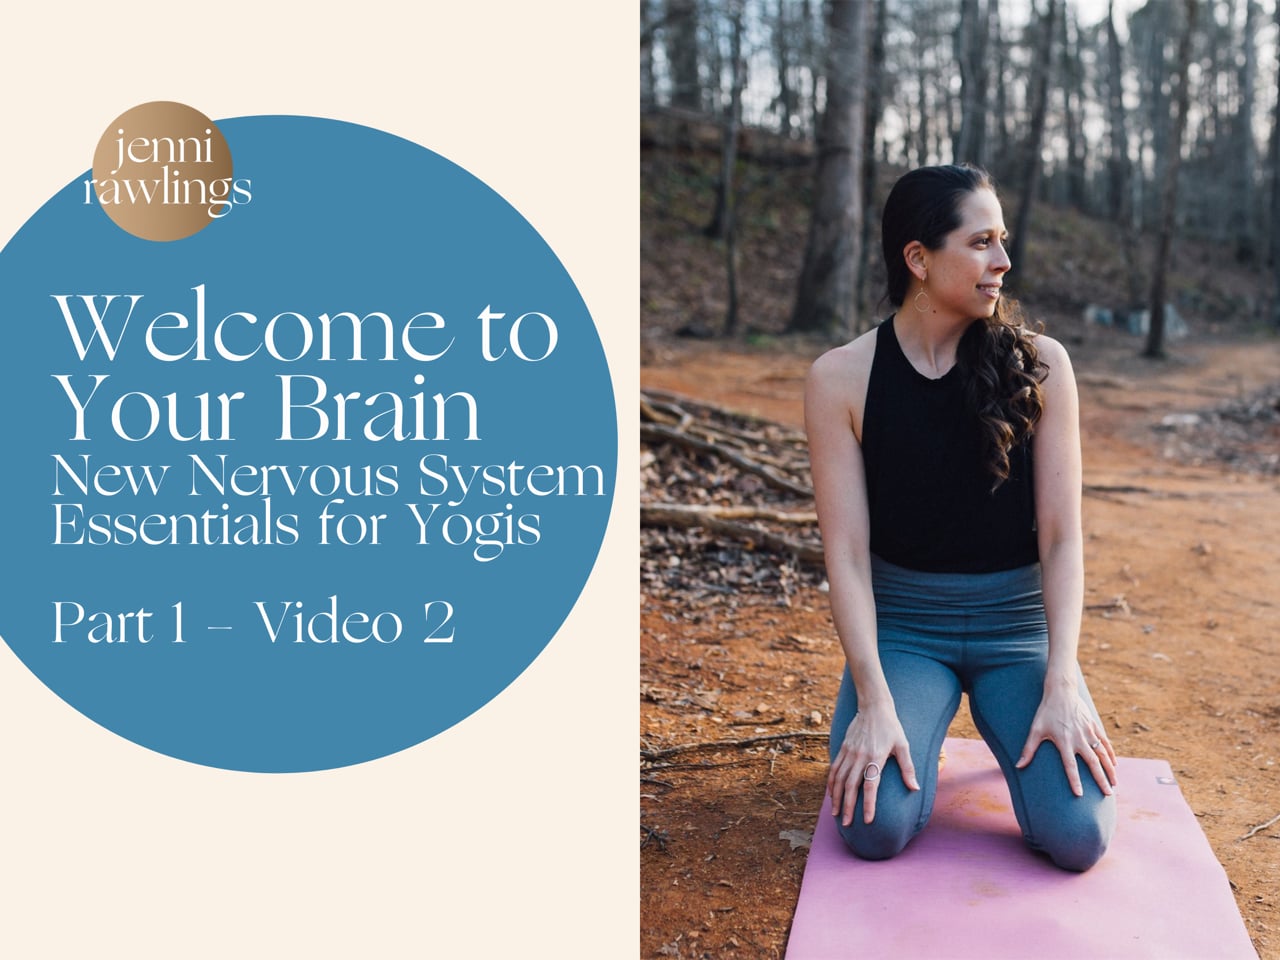 Part 1 Video 2 – Welcome to Your Brain